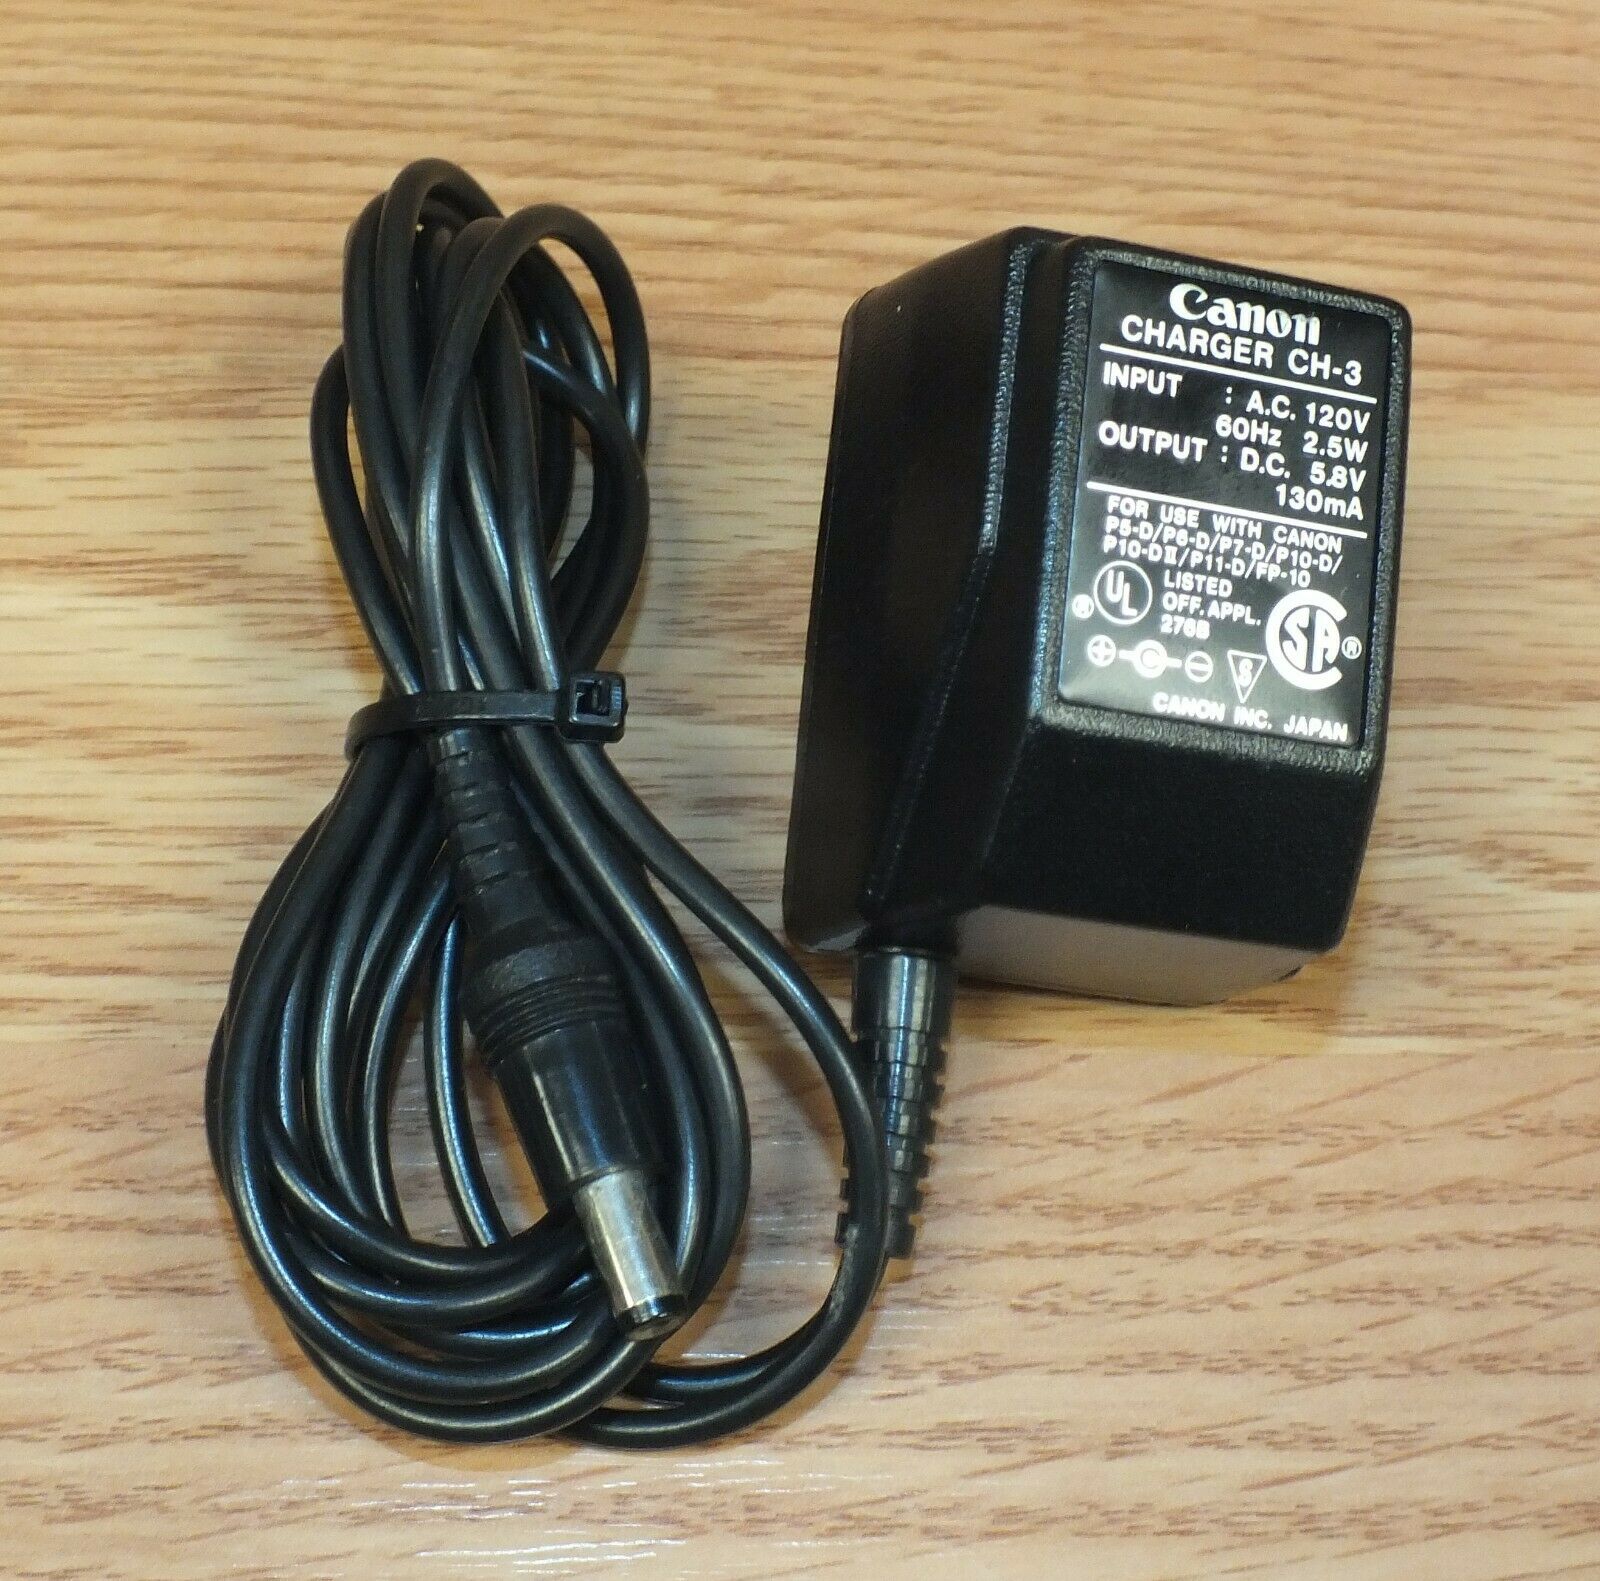 Genuine Canon (CH-3) 5.8v 130mA AC Power Supply / Charger Type: Adapter Output Voltage: 5.8 V Features: Powered Brand: